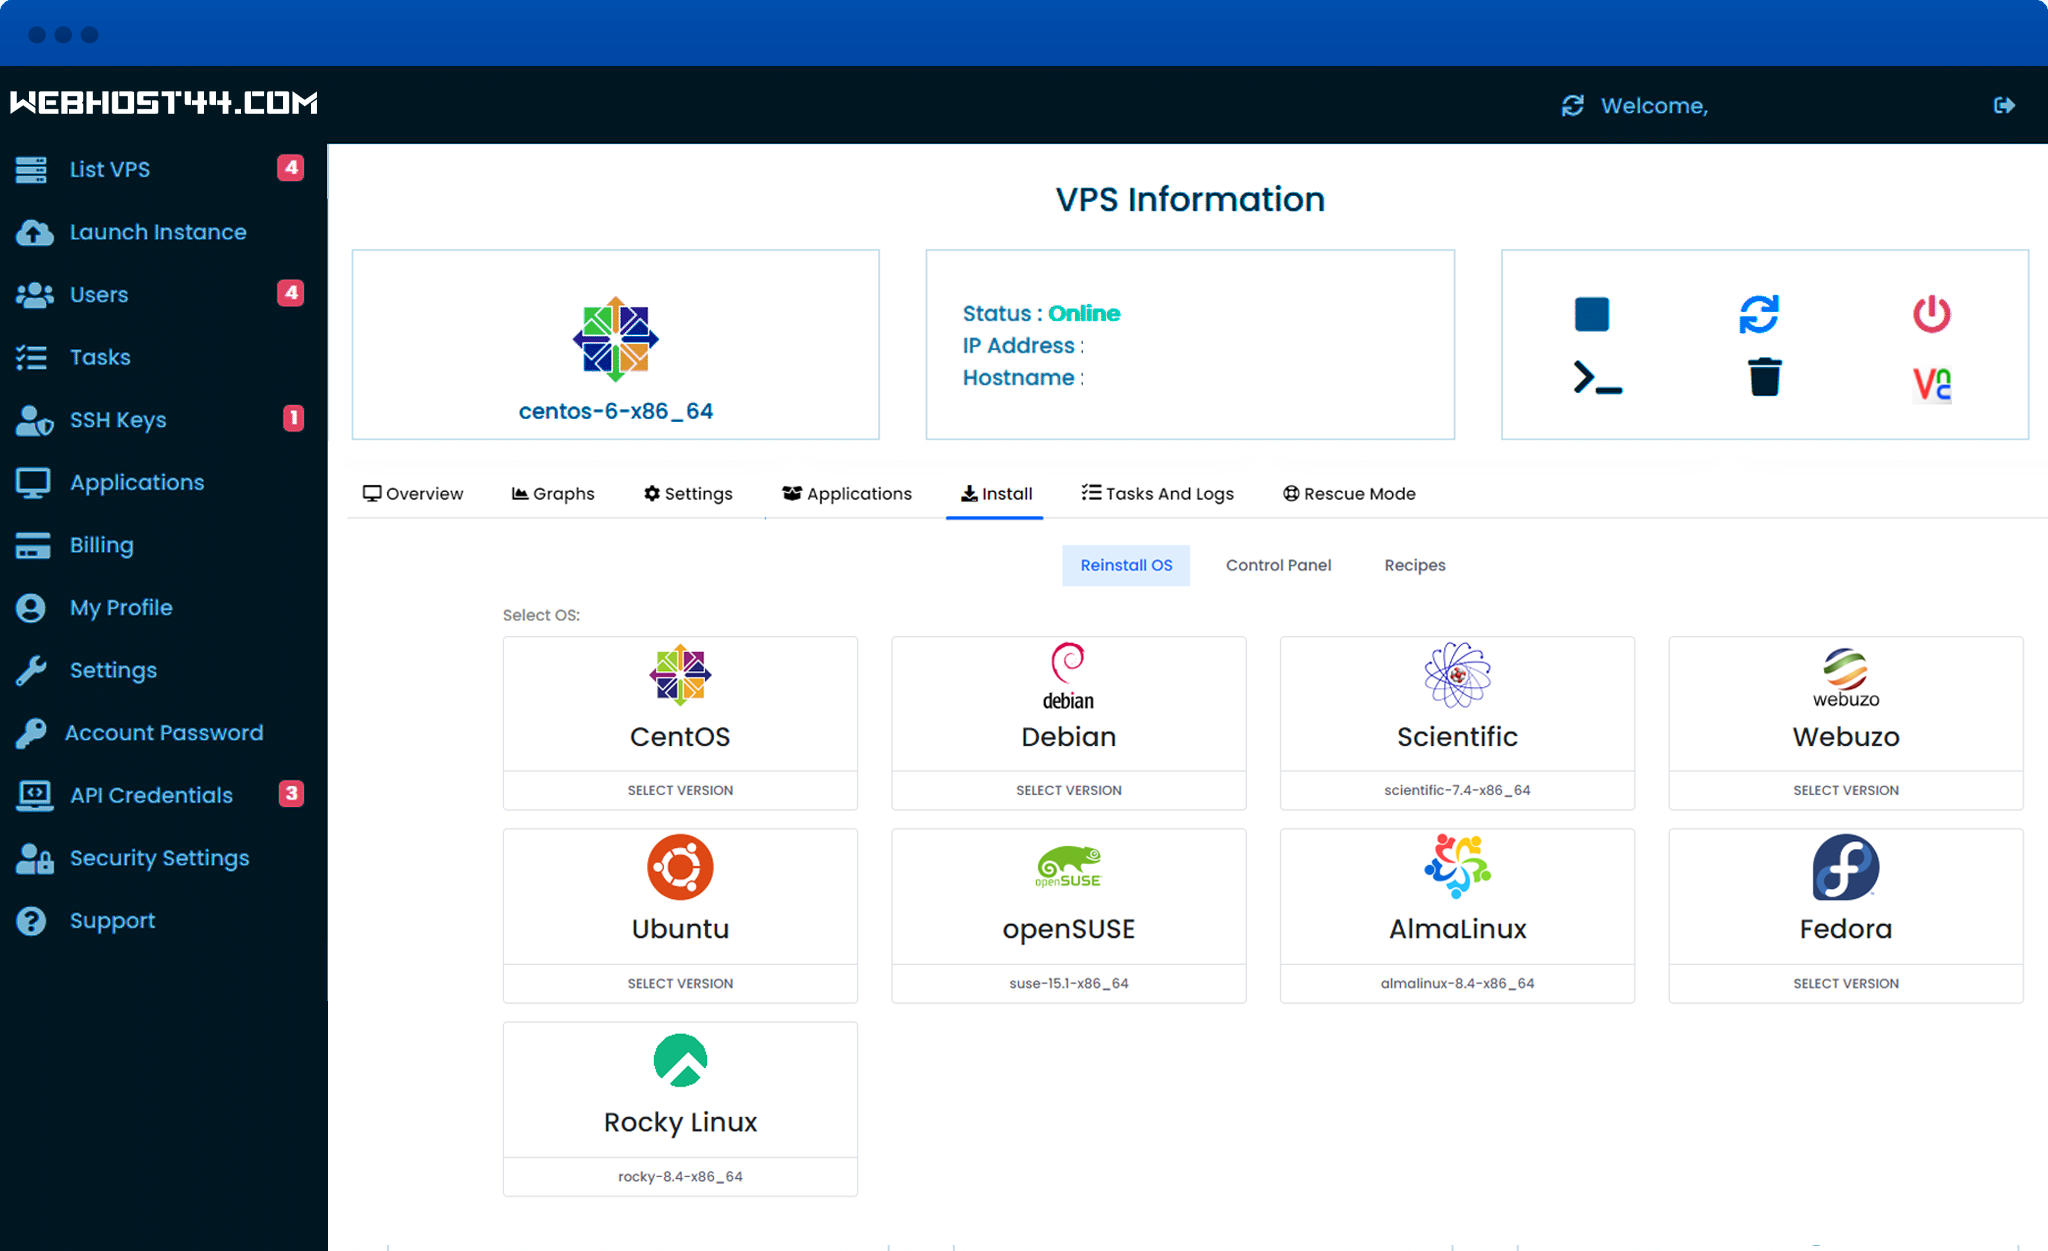 Get Started with a VPS